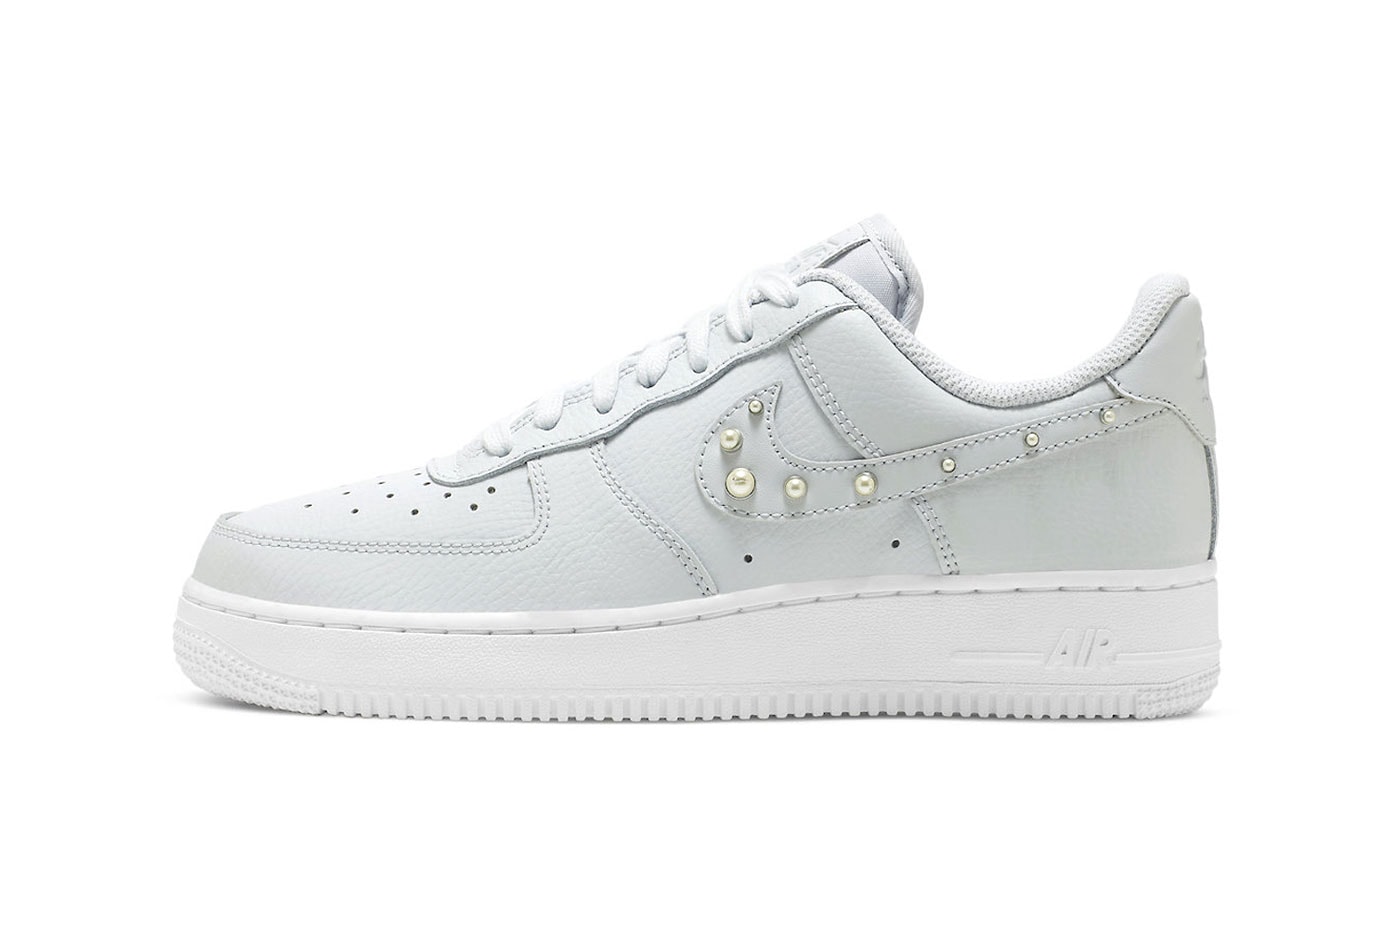 This Nike Air Force 1 Low Arrives With Pearl Studded Swoosh DV3810 001 light grey soft gray white tumbled leather release info price date